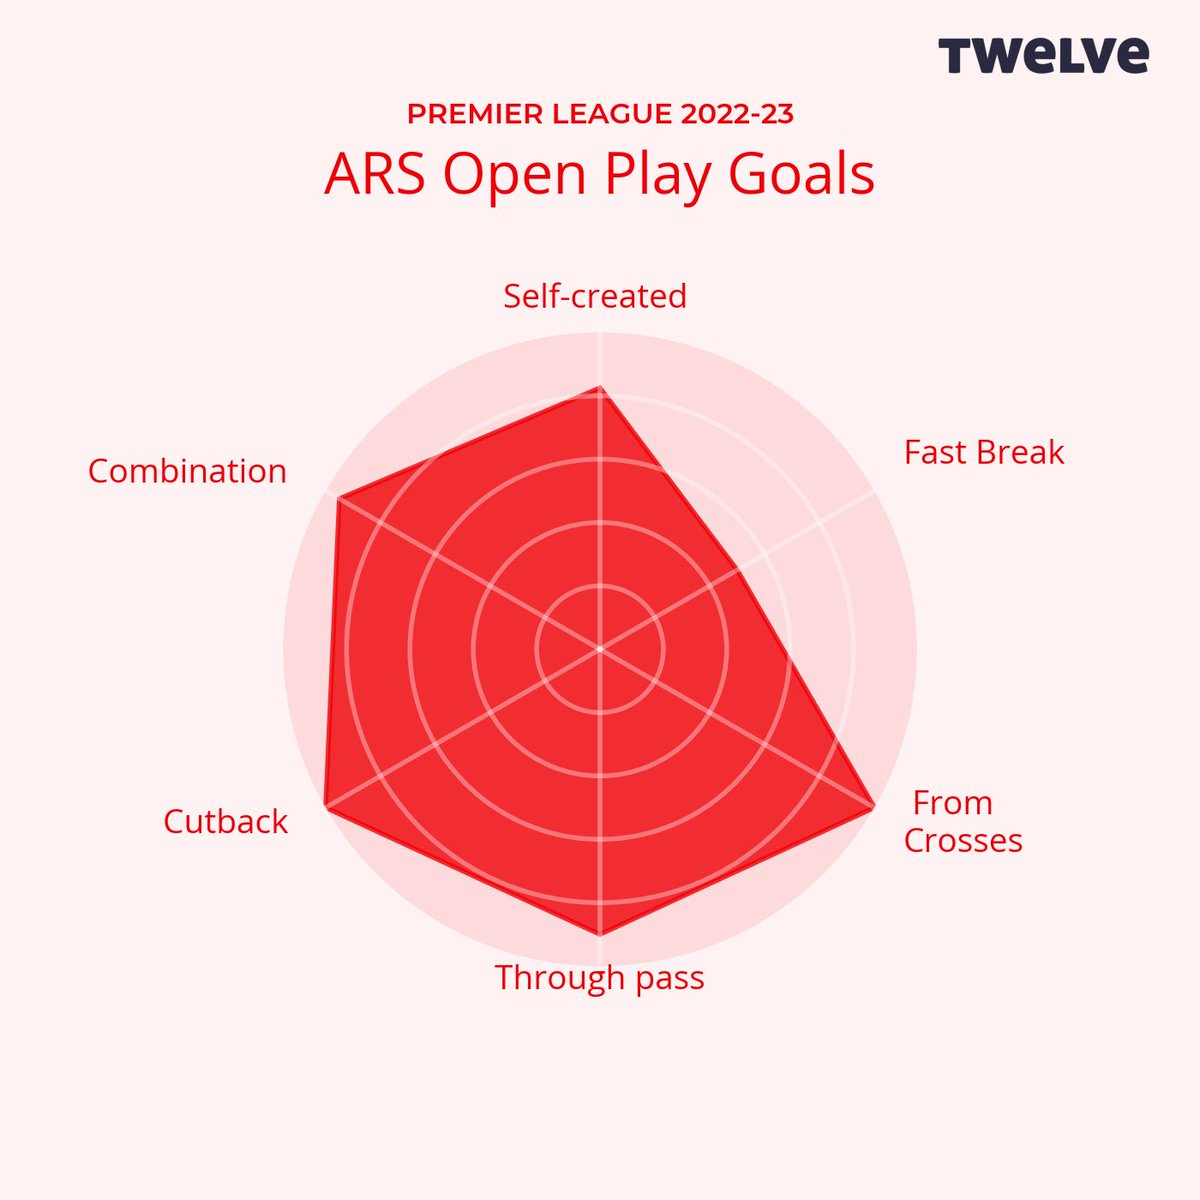 Arsenal themselves are highly skilled in this area; one player in particular is exceptional at timing his arrival into the area - more on him later.

Image: @twelve_football | #AFC